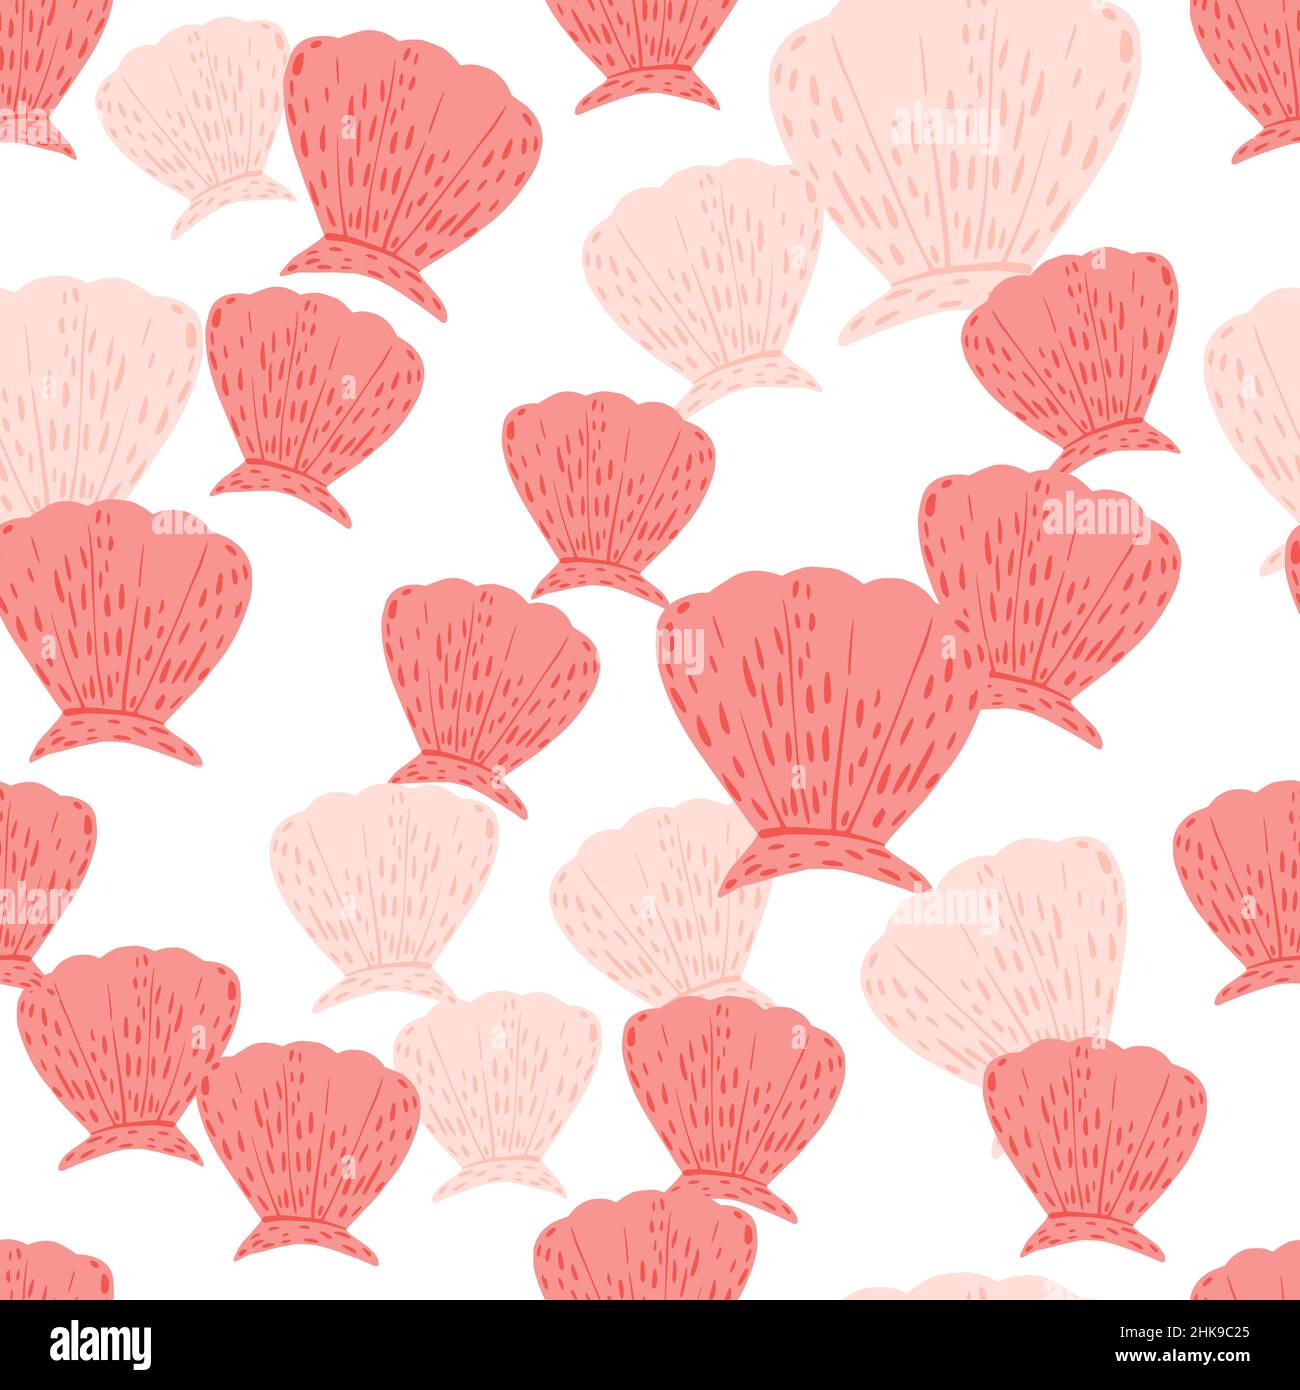 Seashells seamless pattern. Cute conch in doodle style. Beautiful marine texture for fabric, wrapping paper, wallpaper, tissue, illustration. Stock Vector